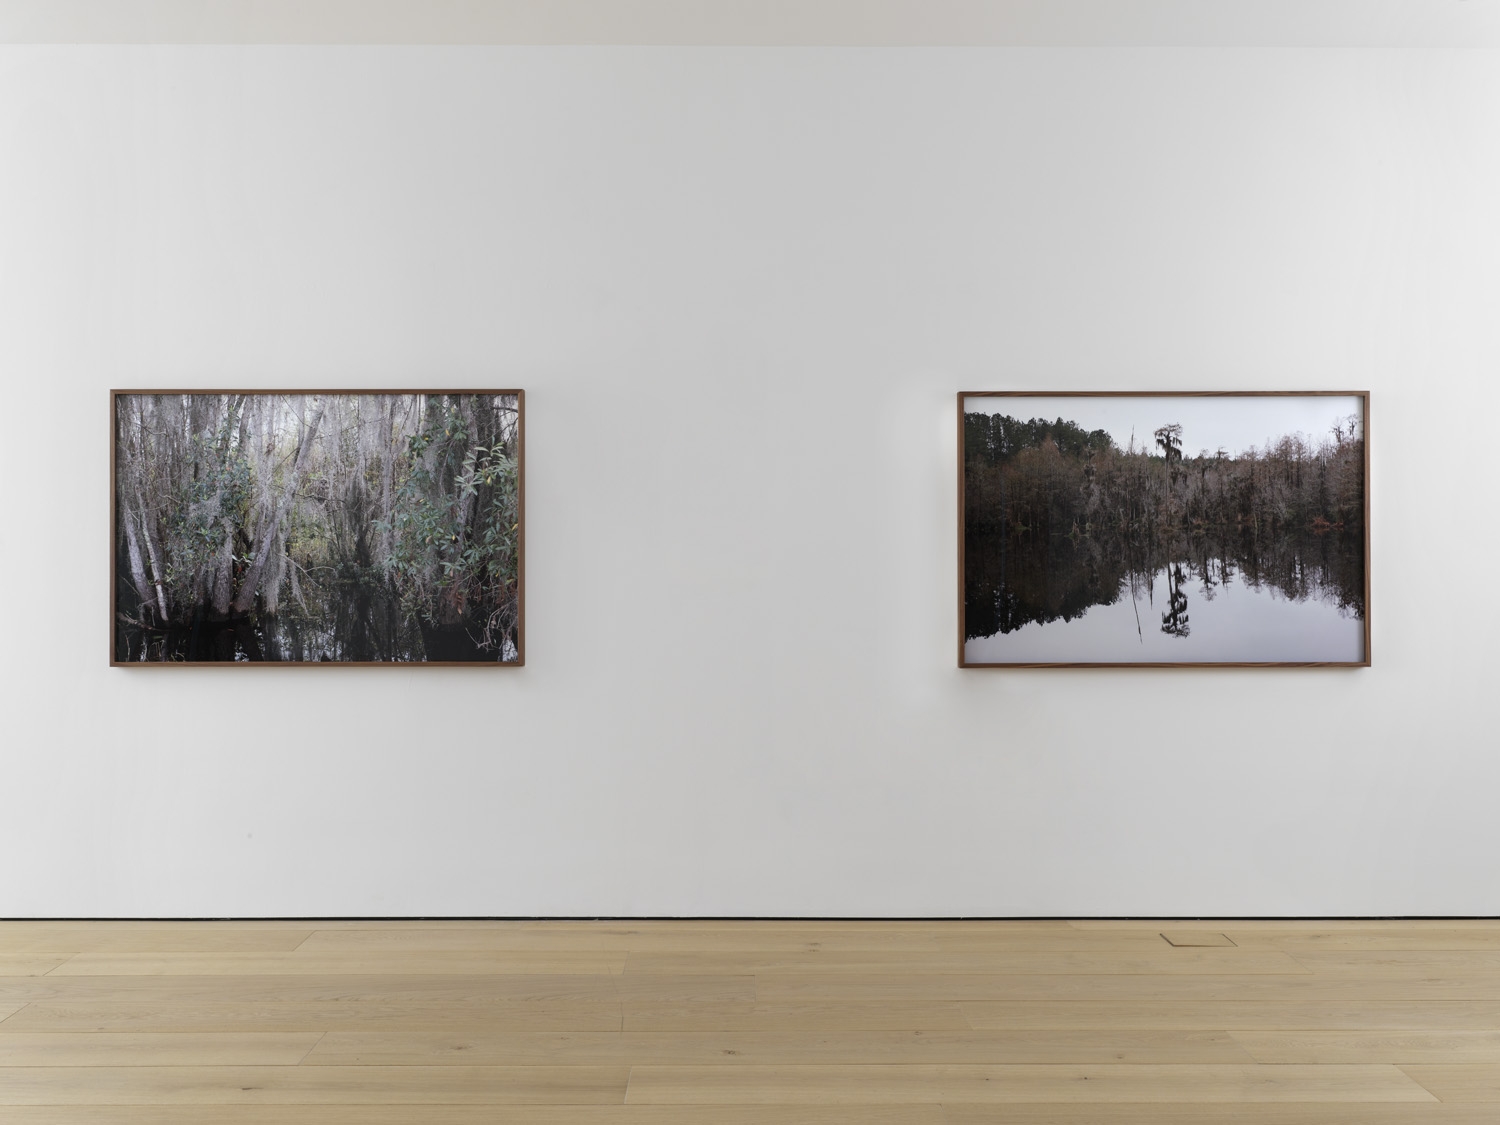 Seventh installation view of the exhibition Catherine Opie: Rhetorical Landscapes at Lehmann Maupin New York